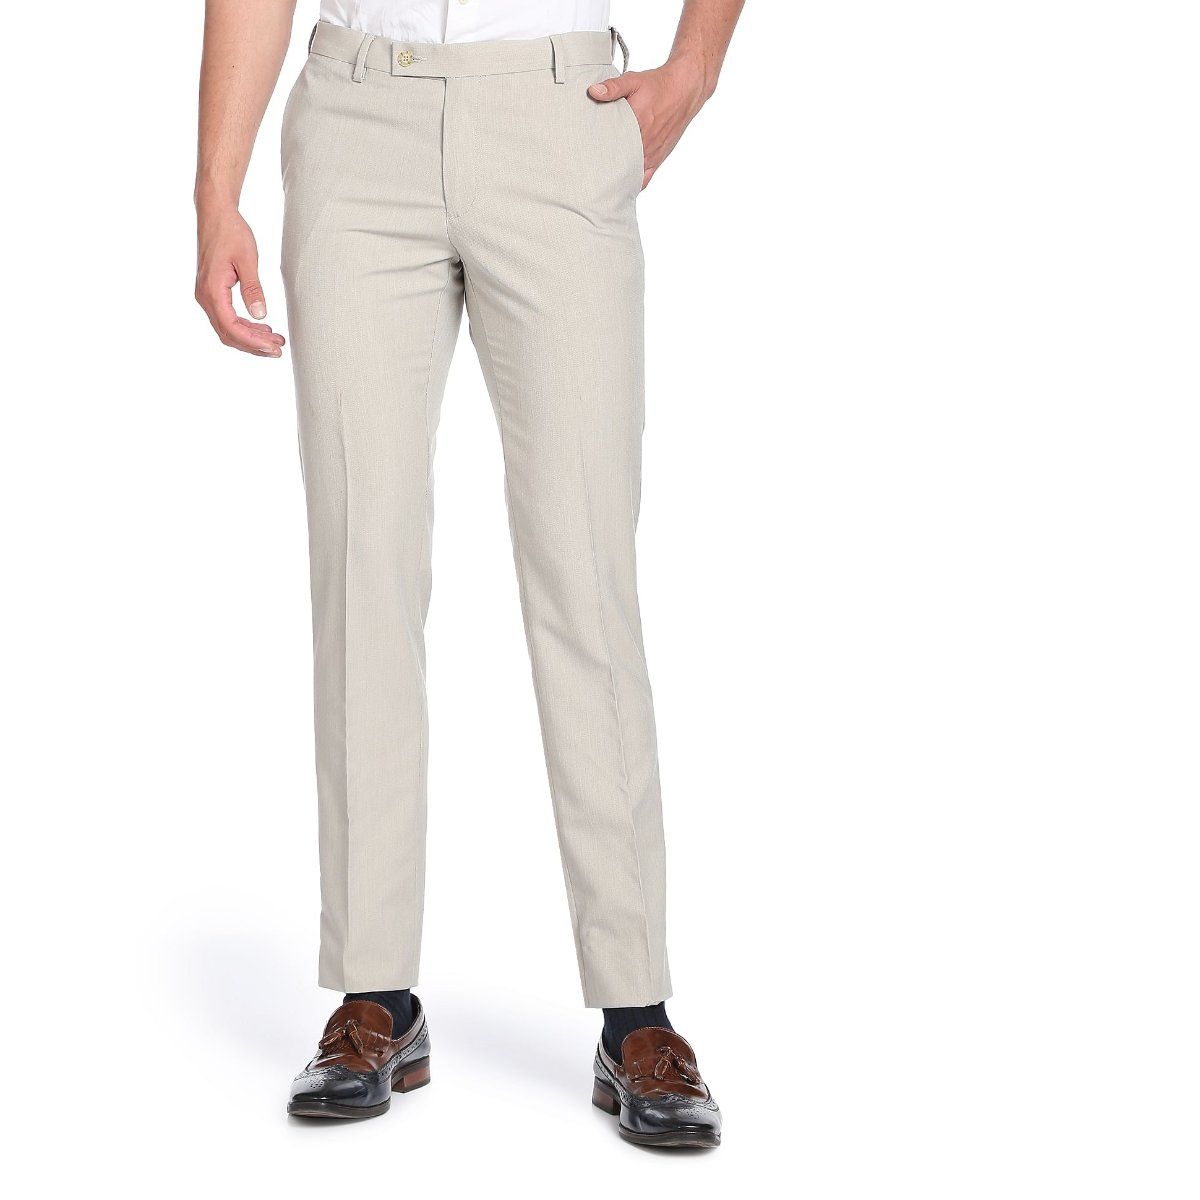 Elements Mall - Pair your iconic whites with our classic autoflex trousers  to go from corporate to ceremonial in seconds! Pick iconic white trousers @ Arrow @ElementsMall ...!!! #trousers #iconicwhites #Arrow #ElementsMall |  Facebook